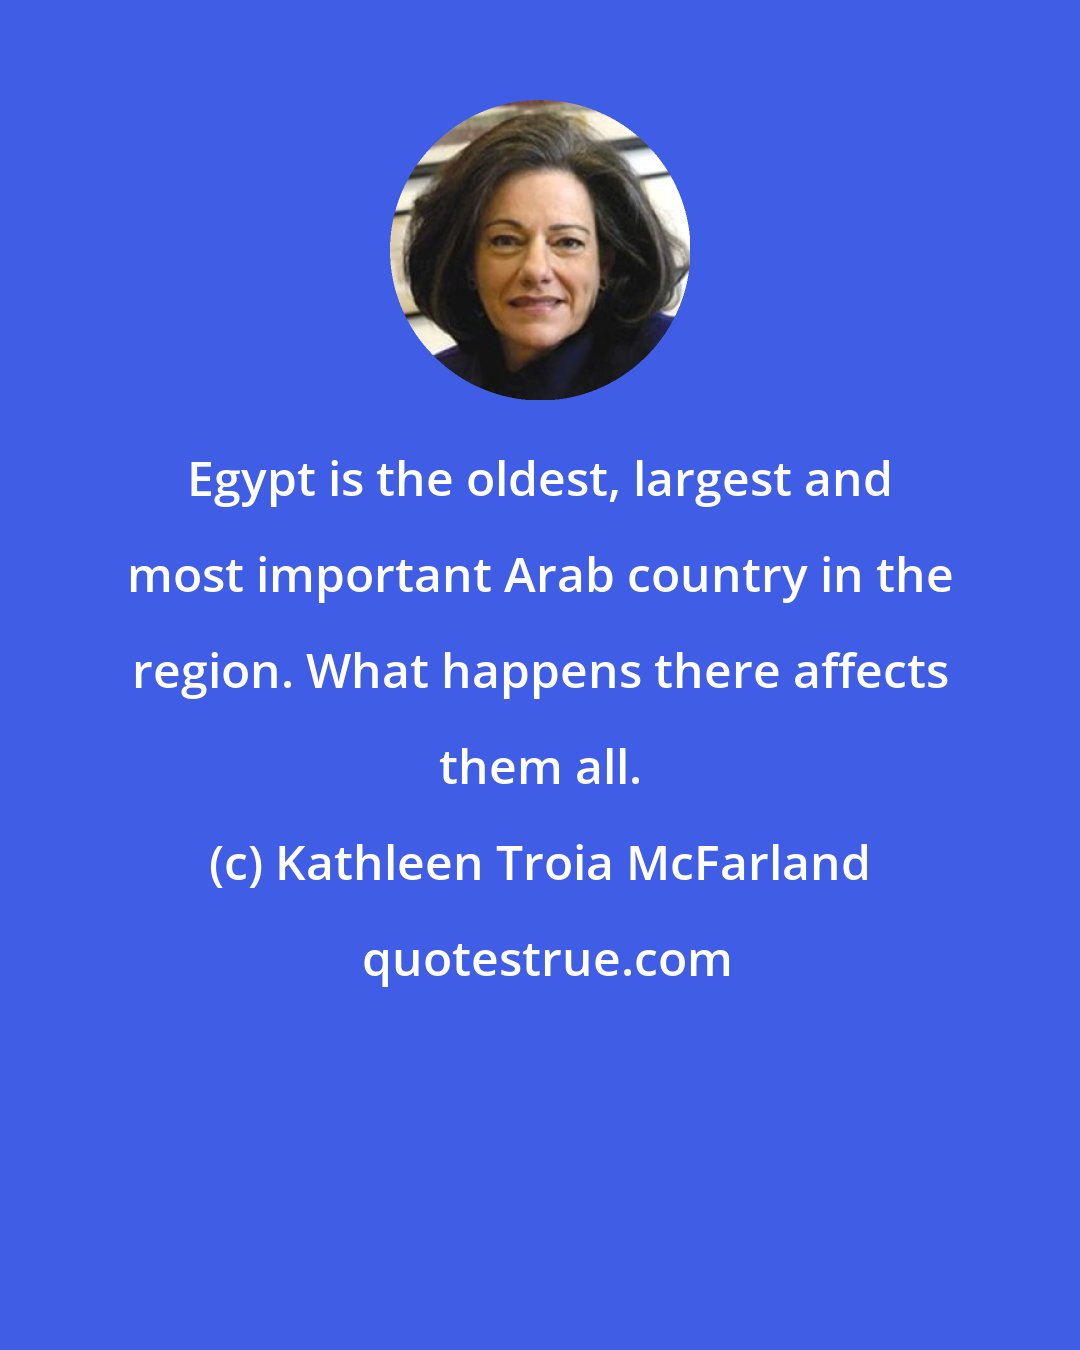 Kathleen Troia McFarland: Egypt is the oldest, largest and most important Arab country in the region. What happens there affects them all.